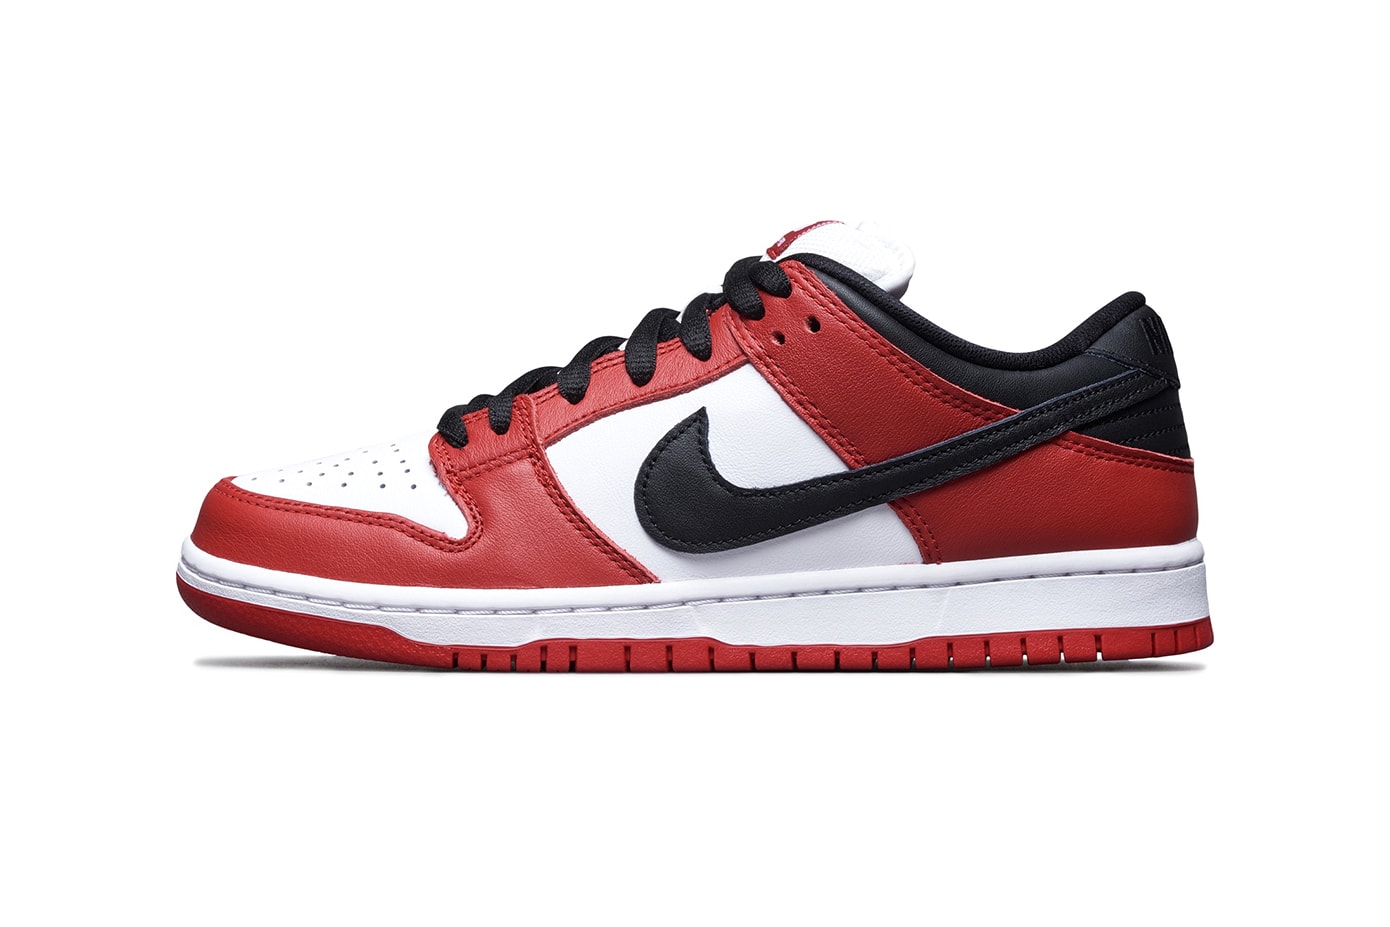 nike sb dunk low j pack chicago release info footwear shoes sneakers